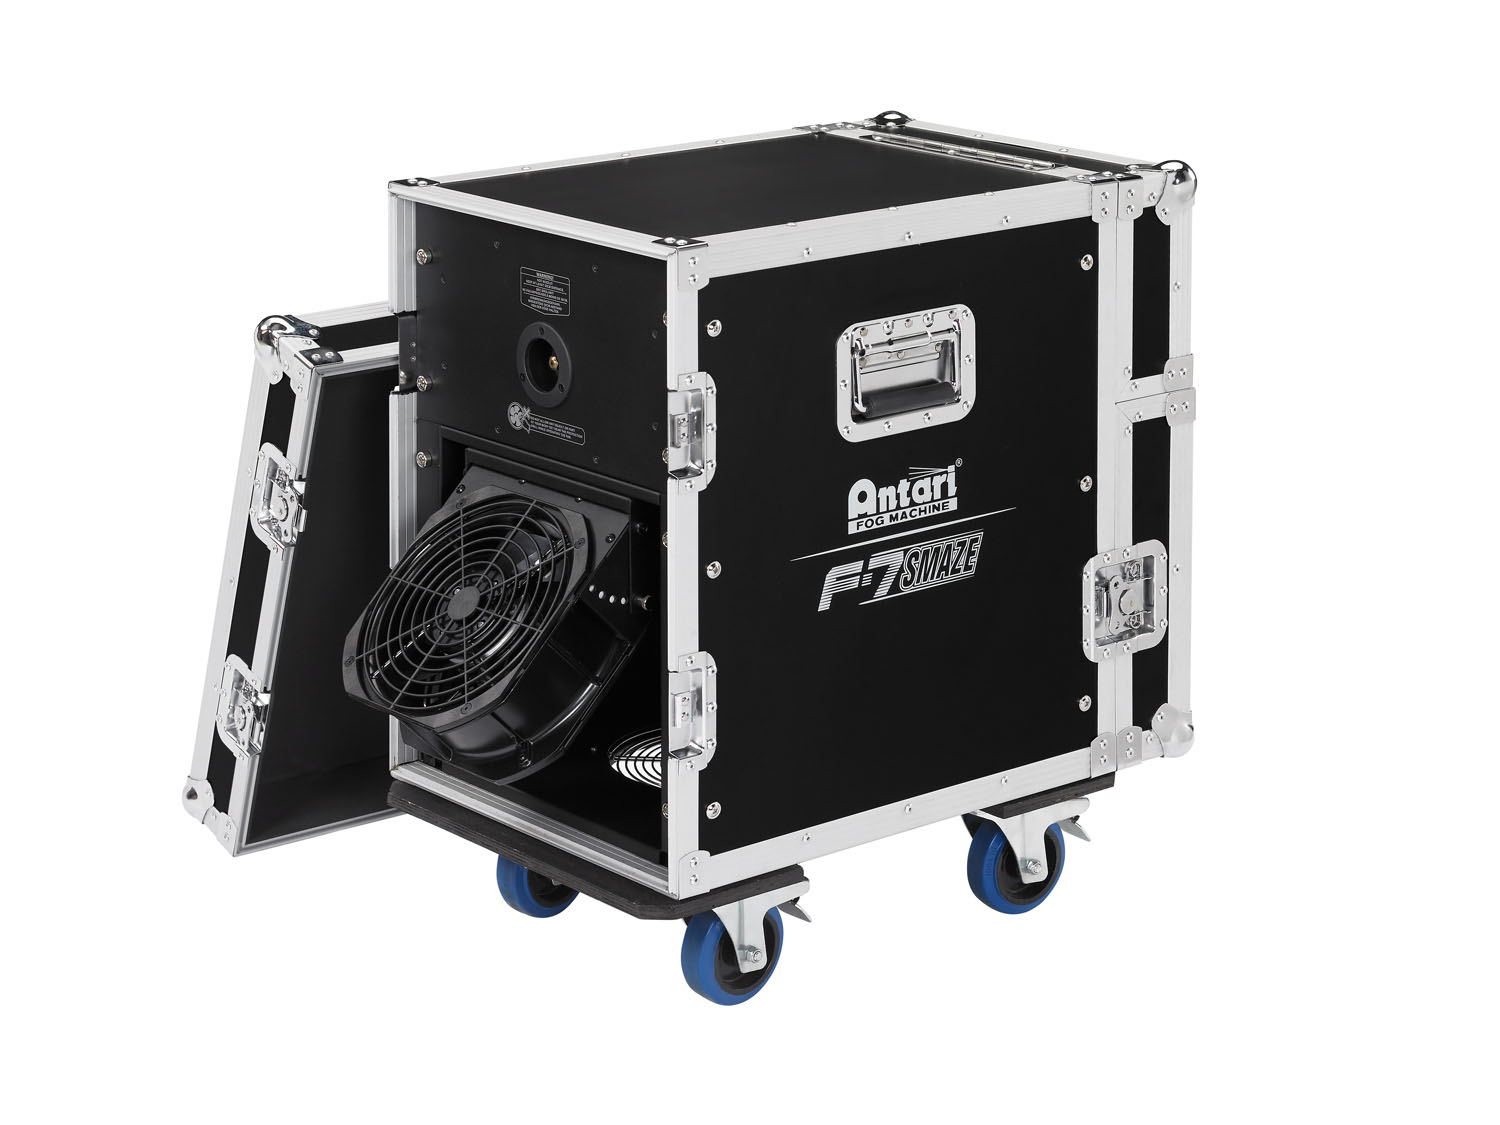 Designed for larger venues, the F-7 Smaze machine offers the all-in-one solution for all your needs with its switchable Fogger and Fazer mode.